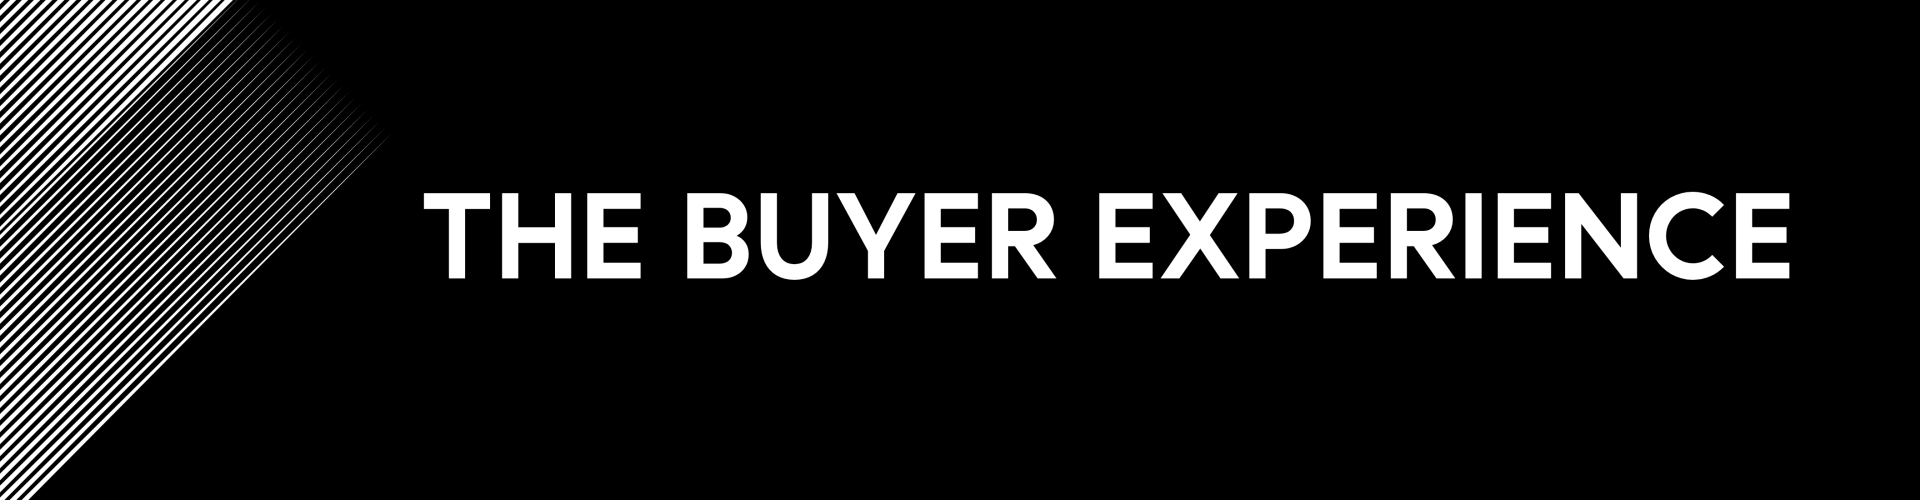 the buyer experience